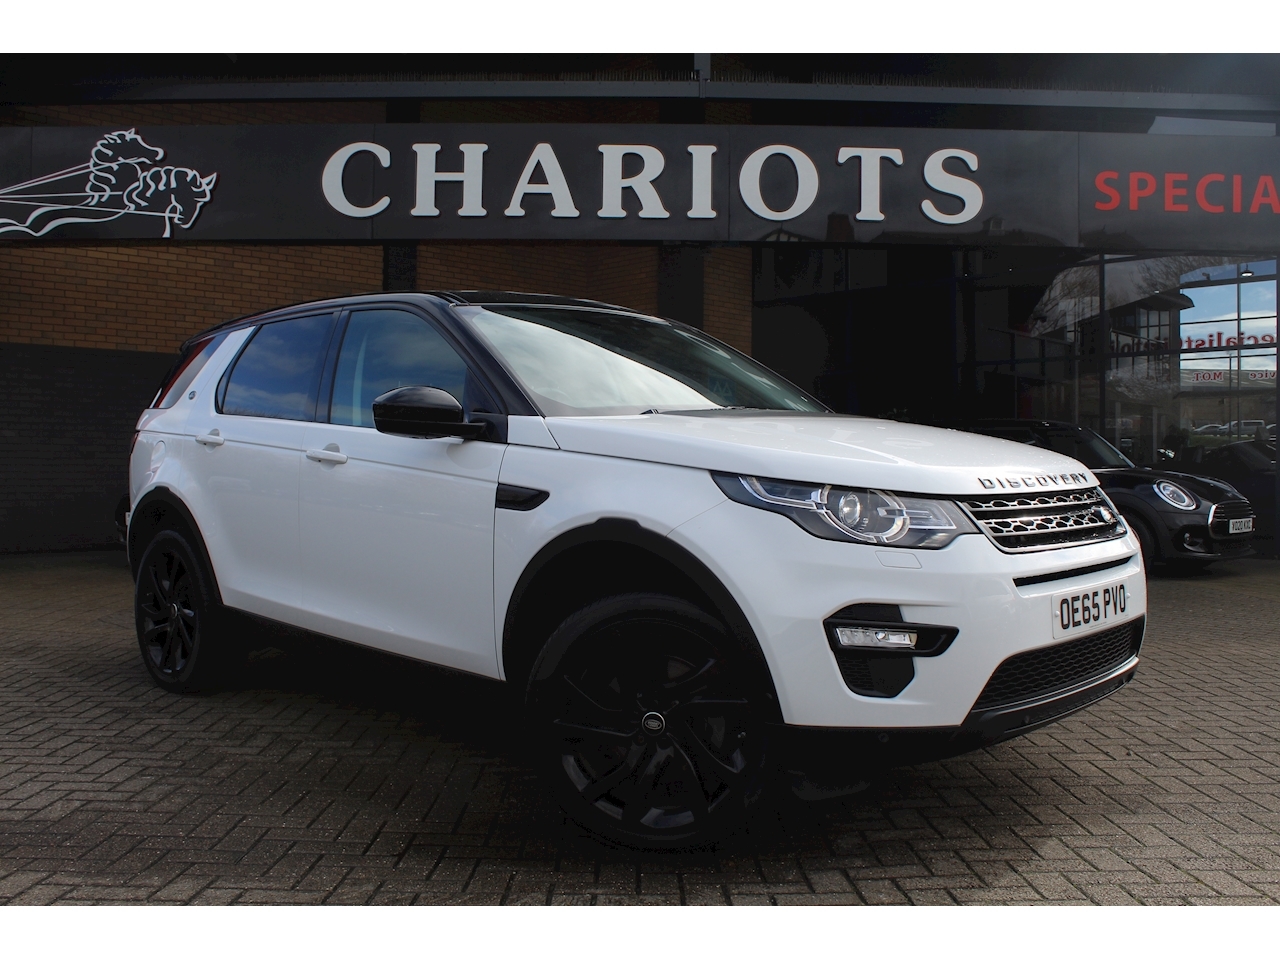 Vuilnisbak Observeer sofa Used 2015 Land Rover Discovery Sport Td4 Hse Luxury For Sale (U2843) |  Chariots Specialist Cars